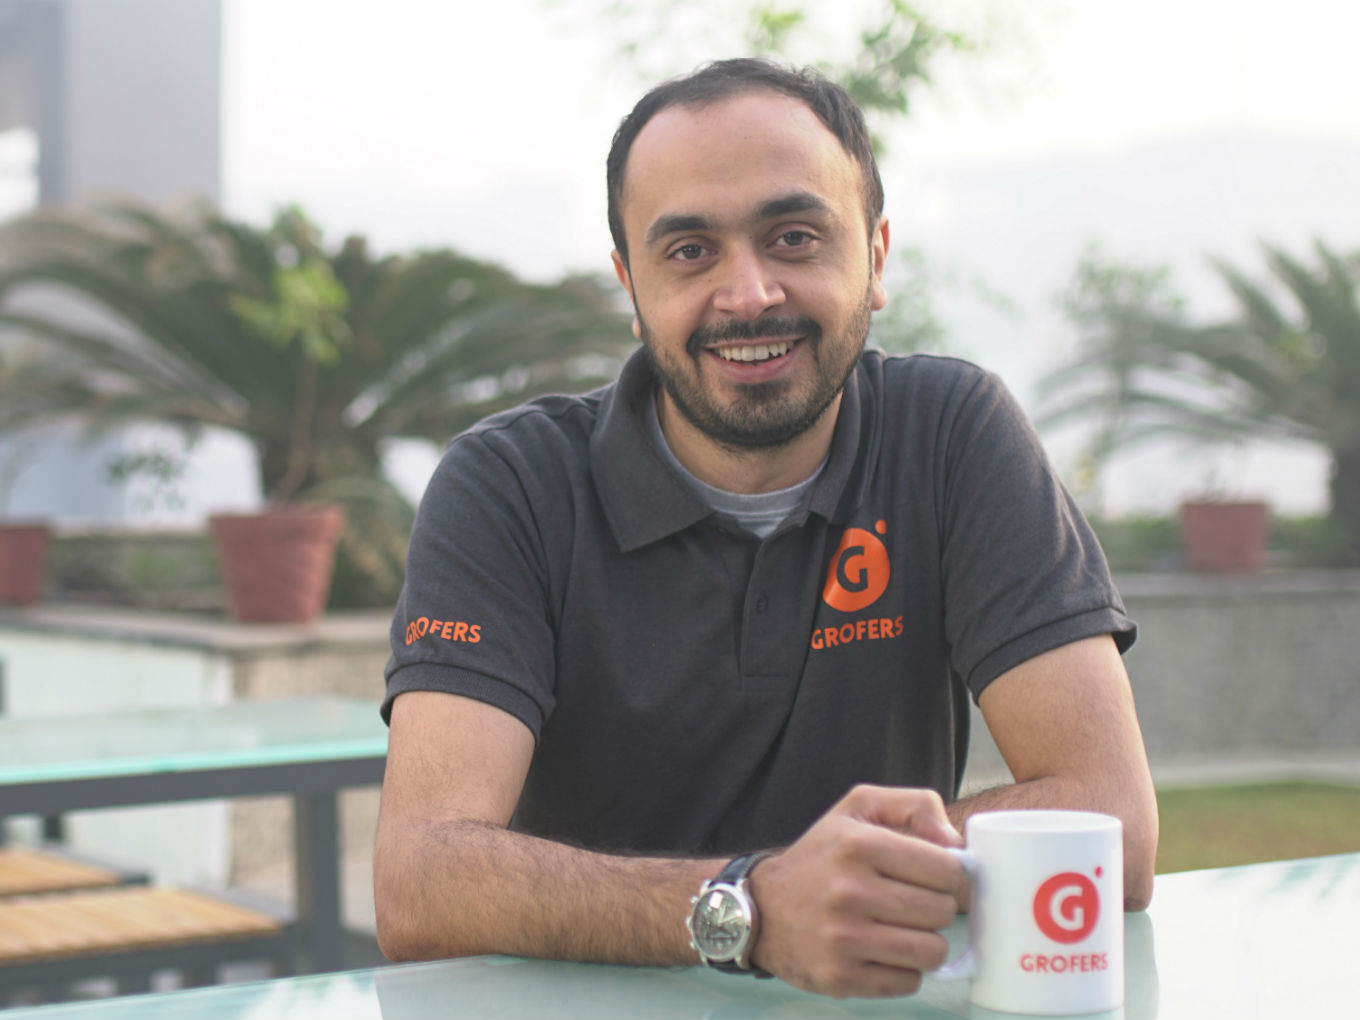 Grofers Joins Unicorn Club With $200 Mn Funding Led By SoftBank